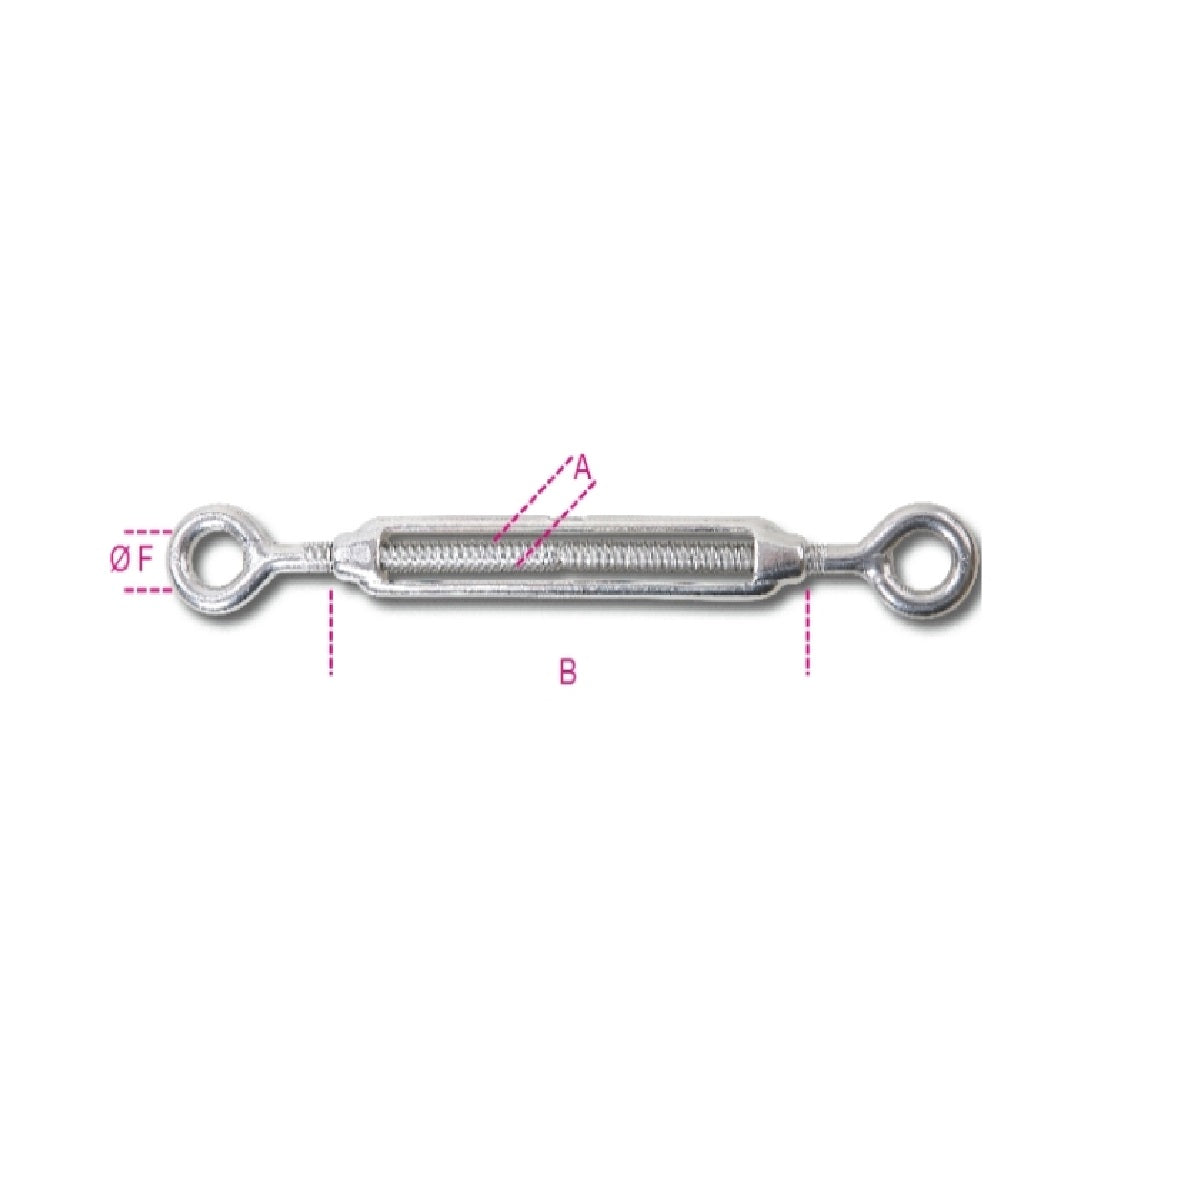 Two-eye turnbuckle stainless steel AISI 316 - Beta 8205